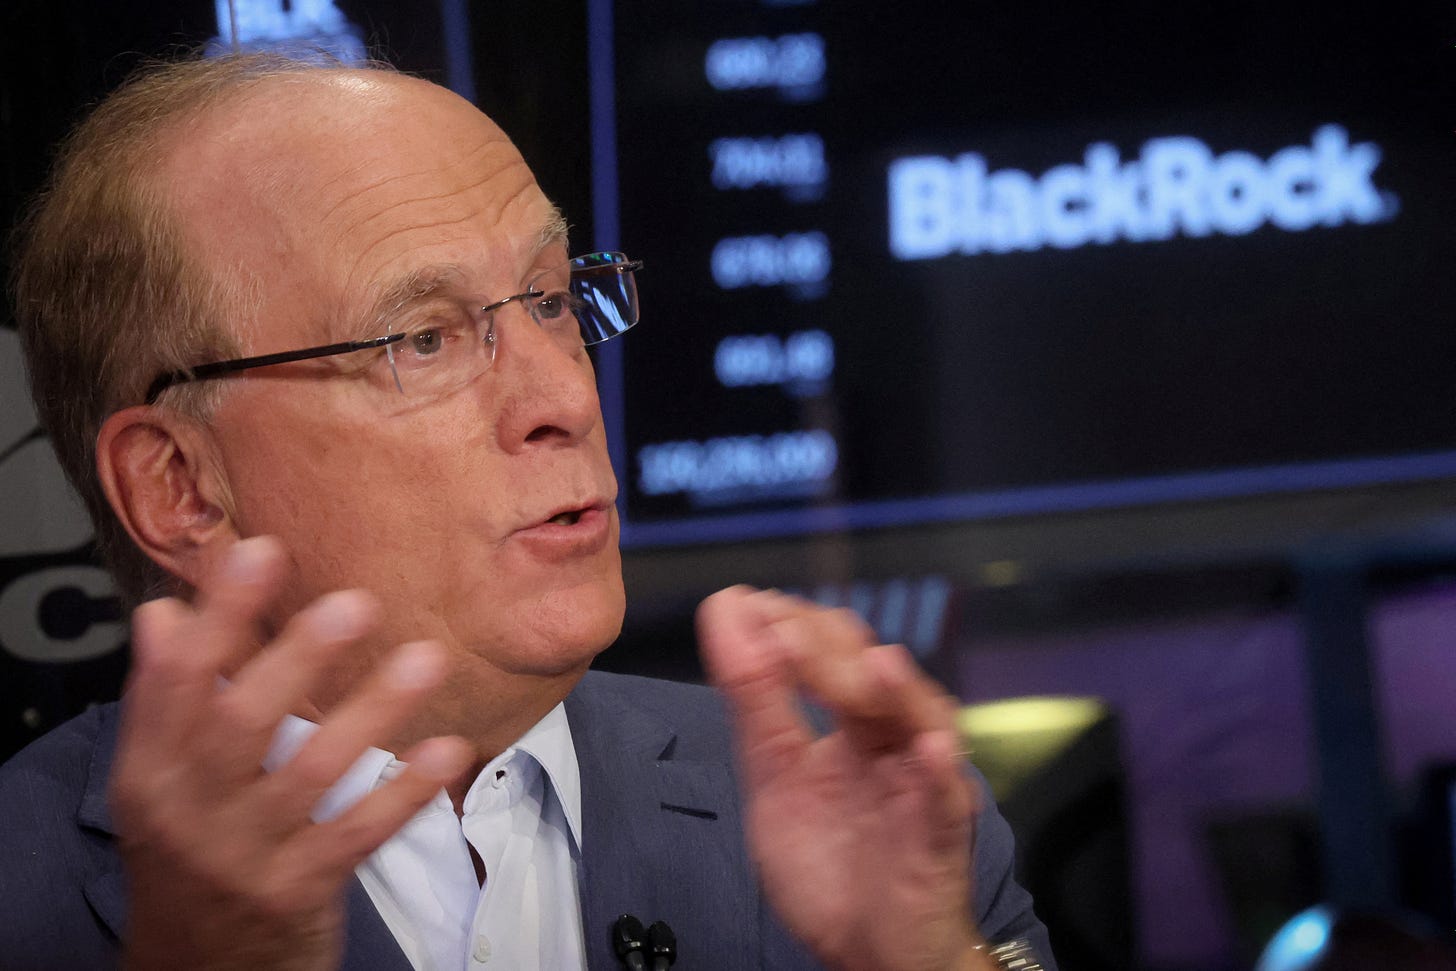 Larry Fink, Chairman and CEO of BlackRock, at the NYSE in New York